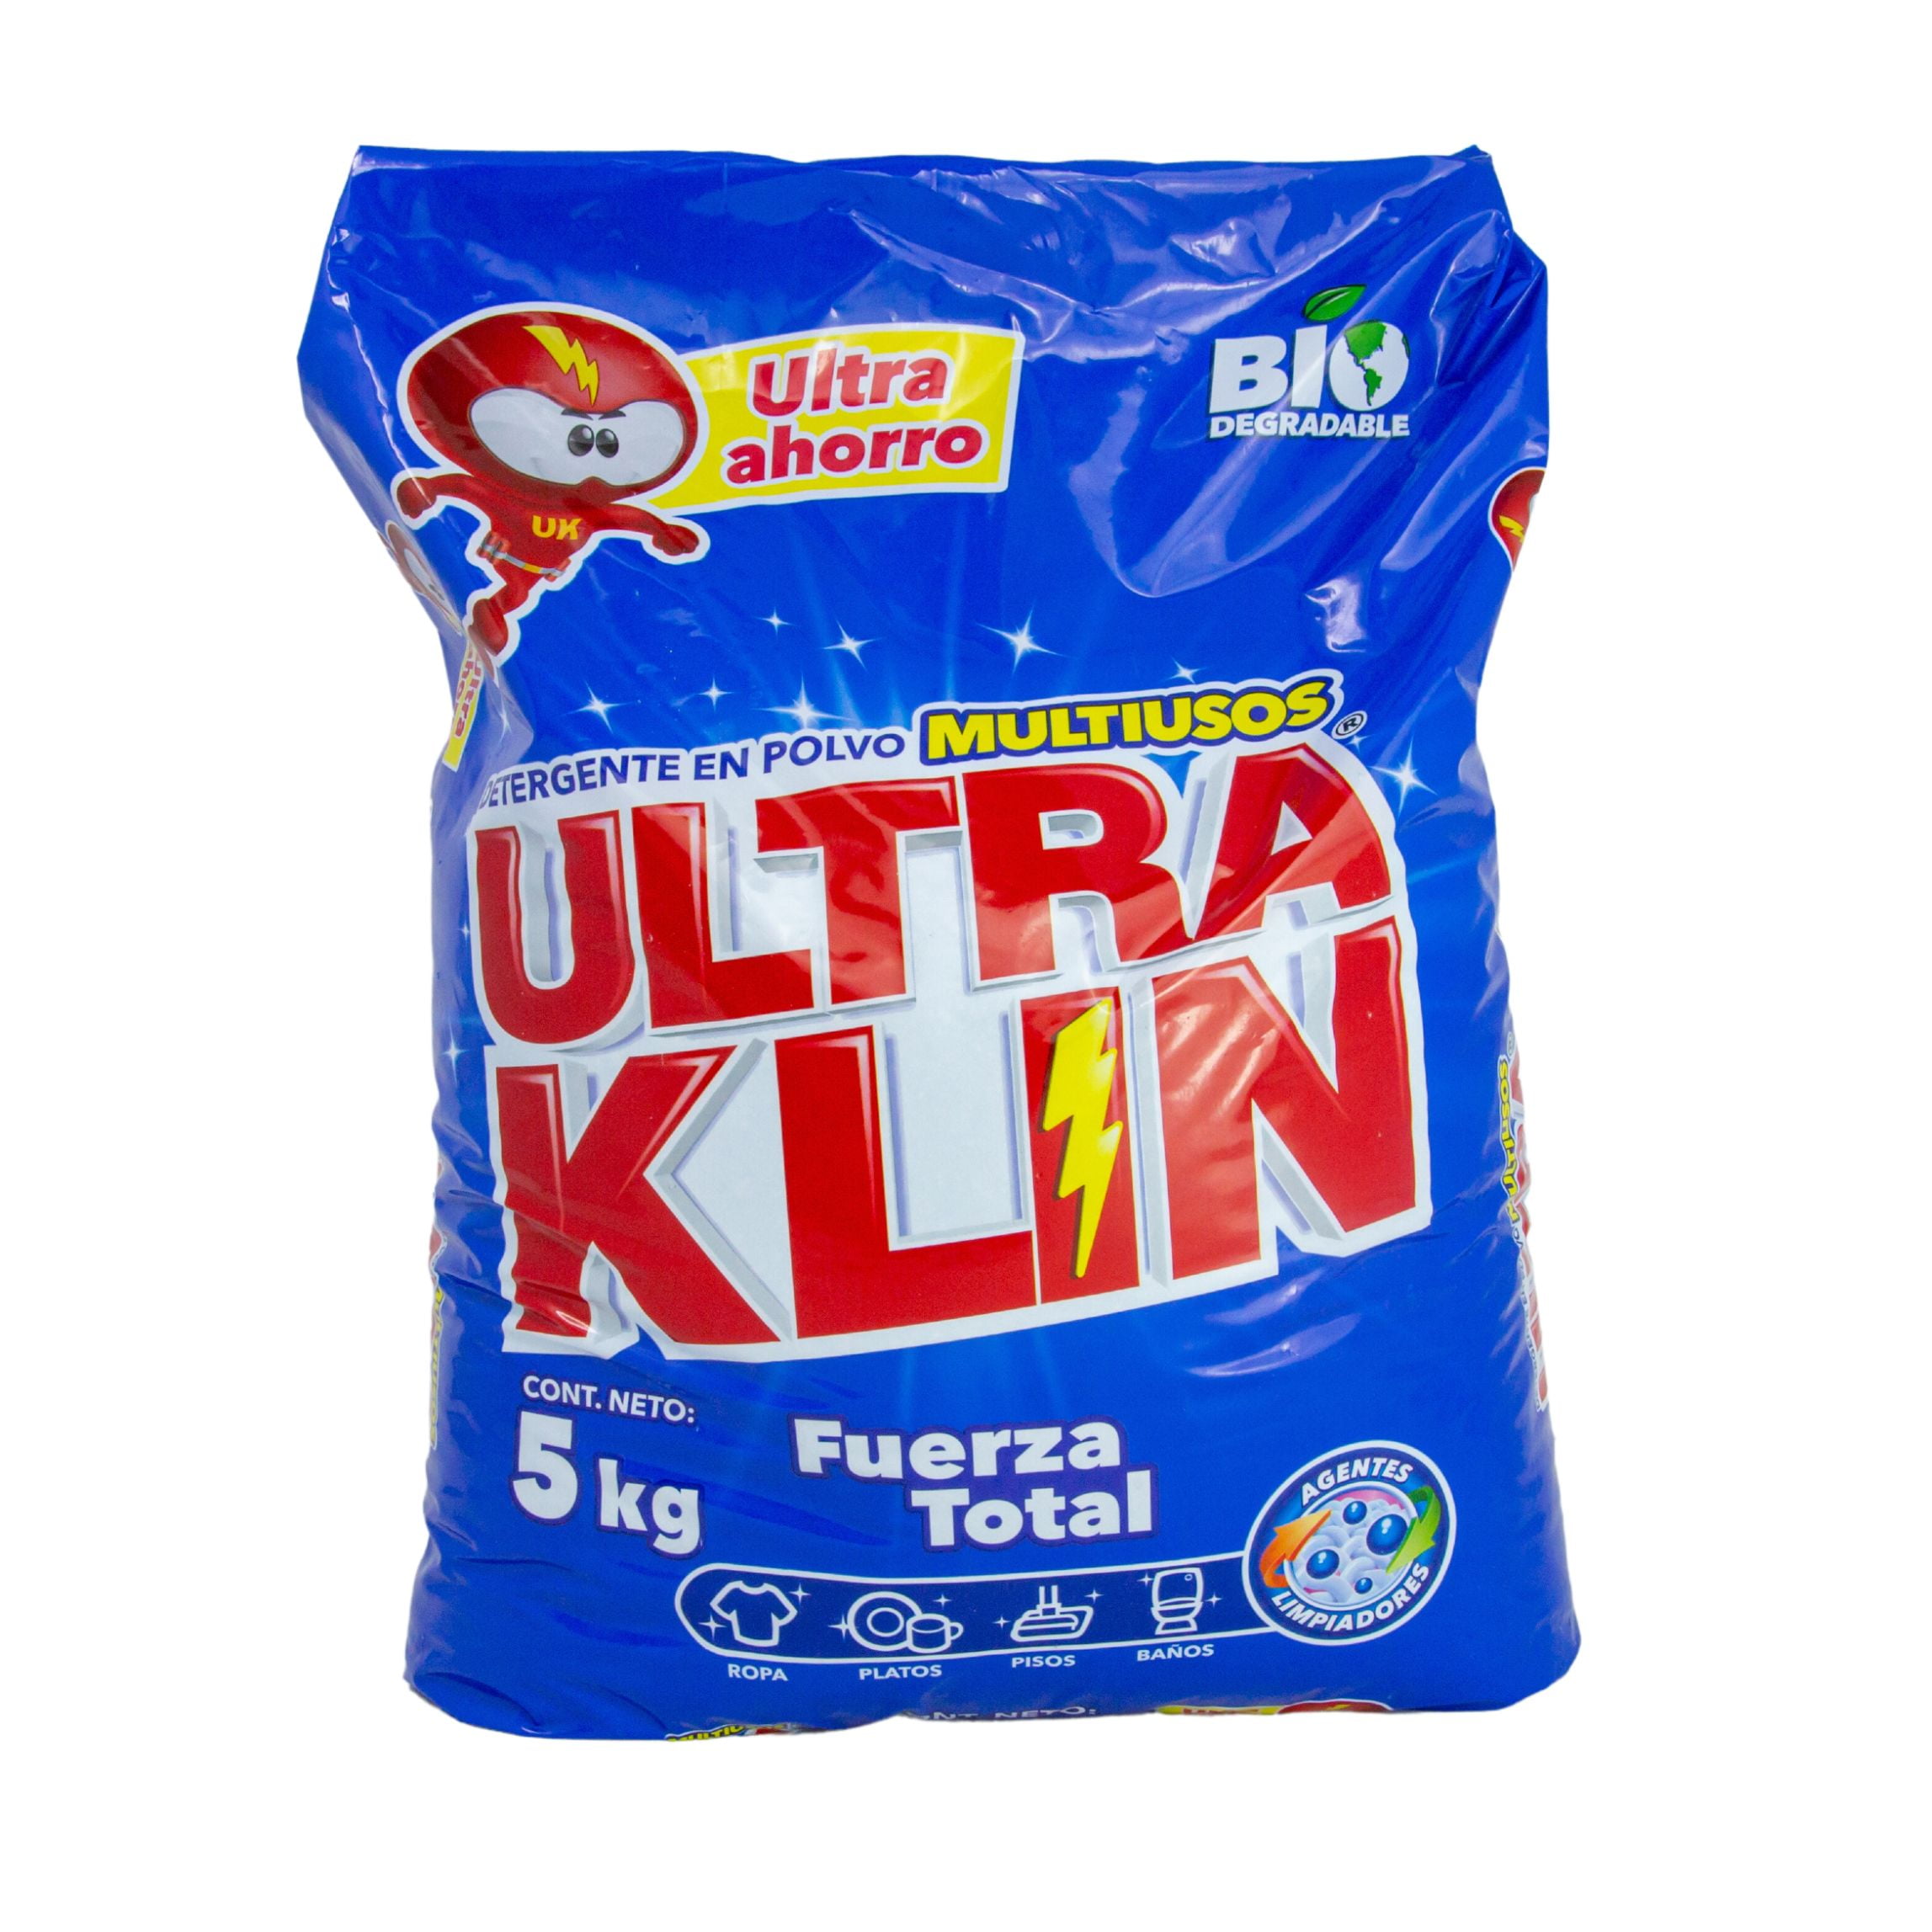 SKIP Active Clean Detergent Powder, 2.22 Kg Unilever - Lab Asia Science and  Technology Corporation